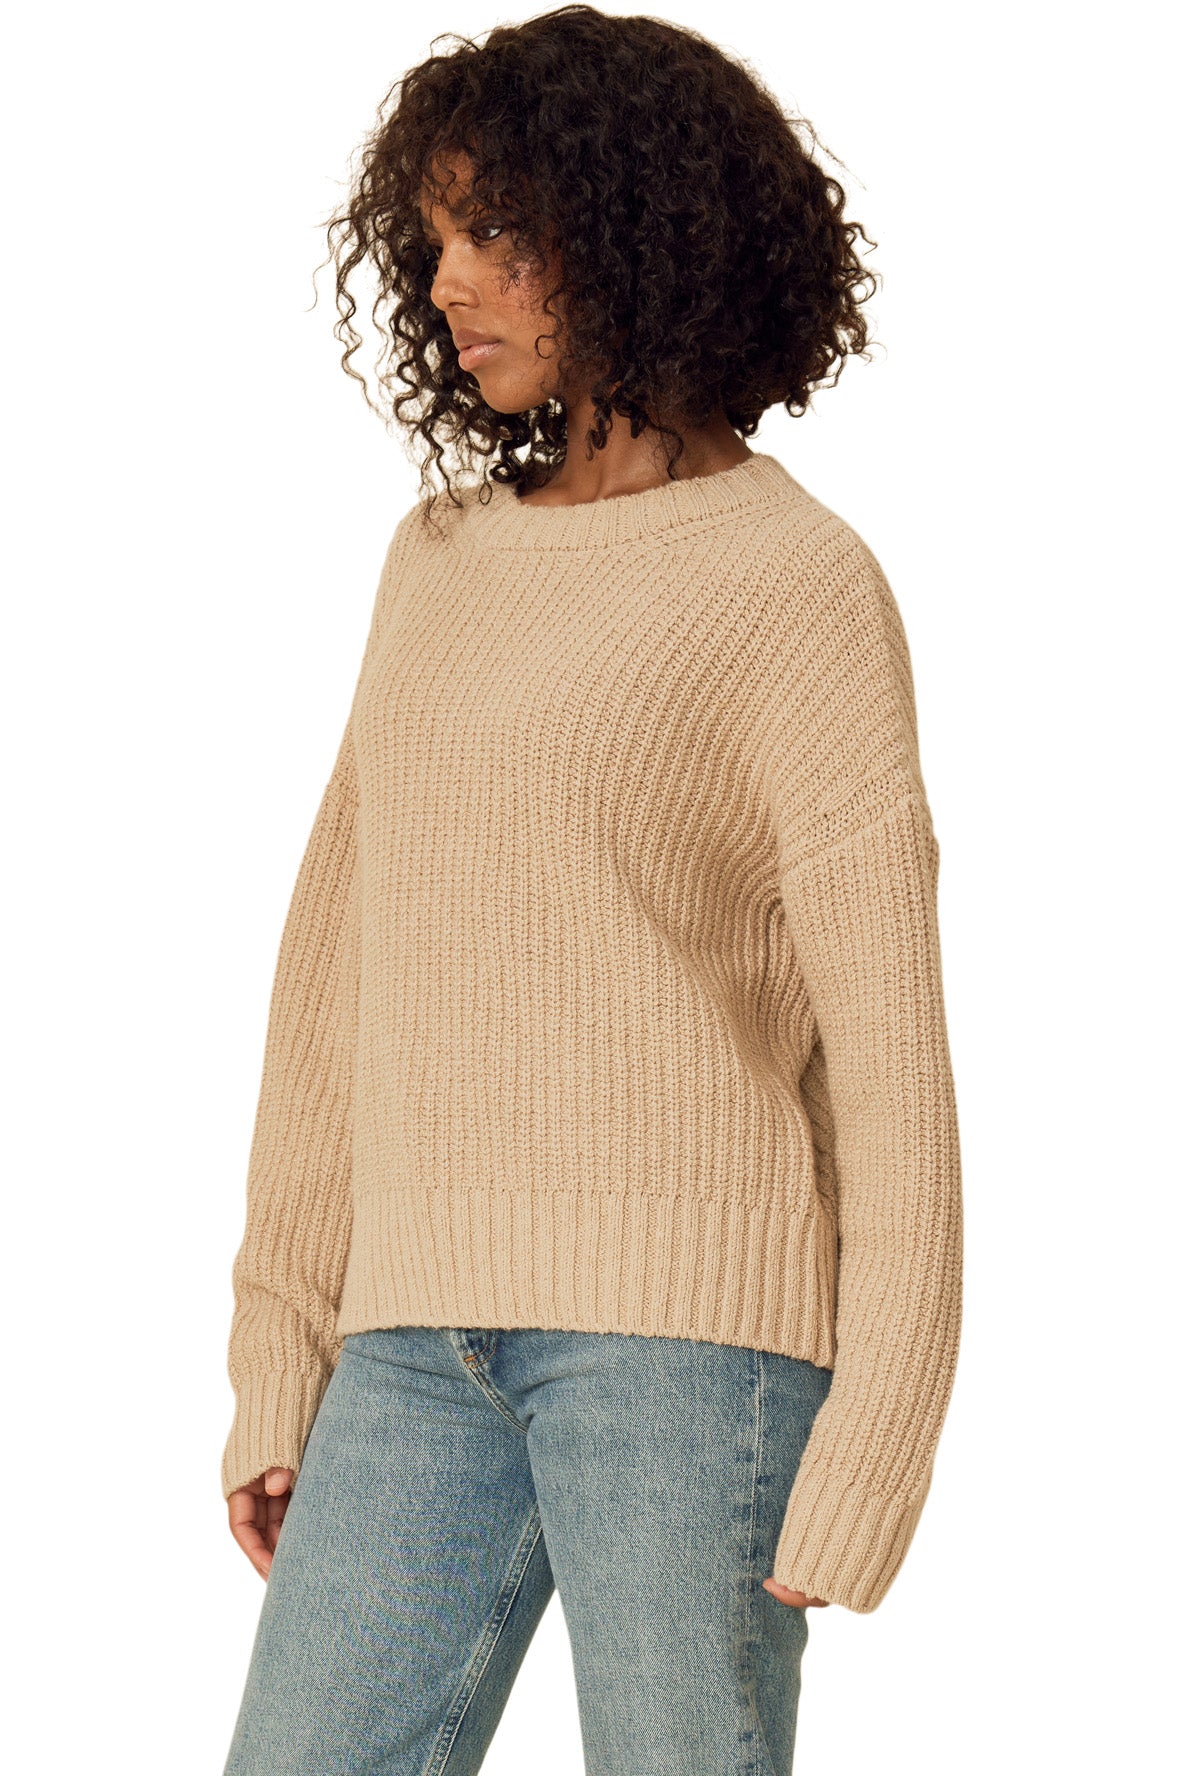 One Grey Day Seymour Oversided Pullover in Oatmeal